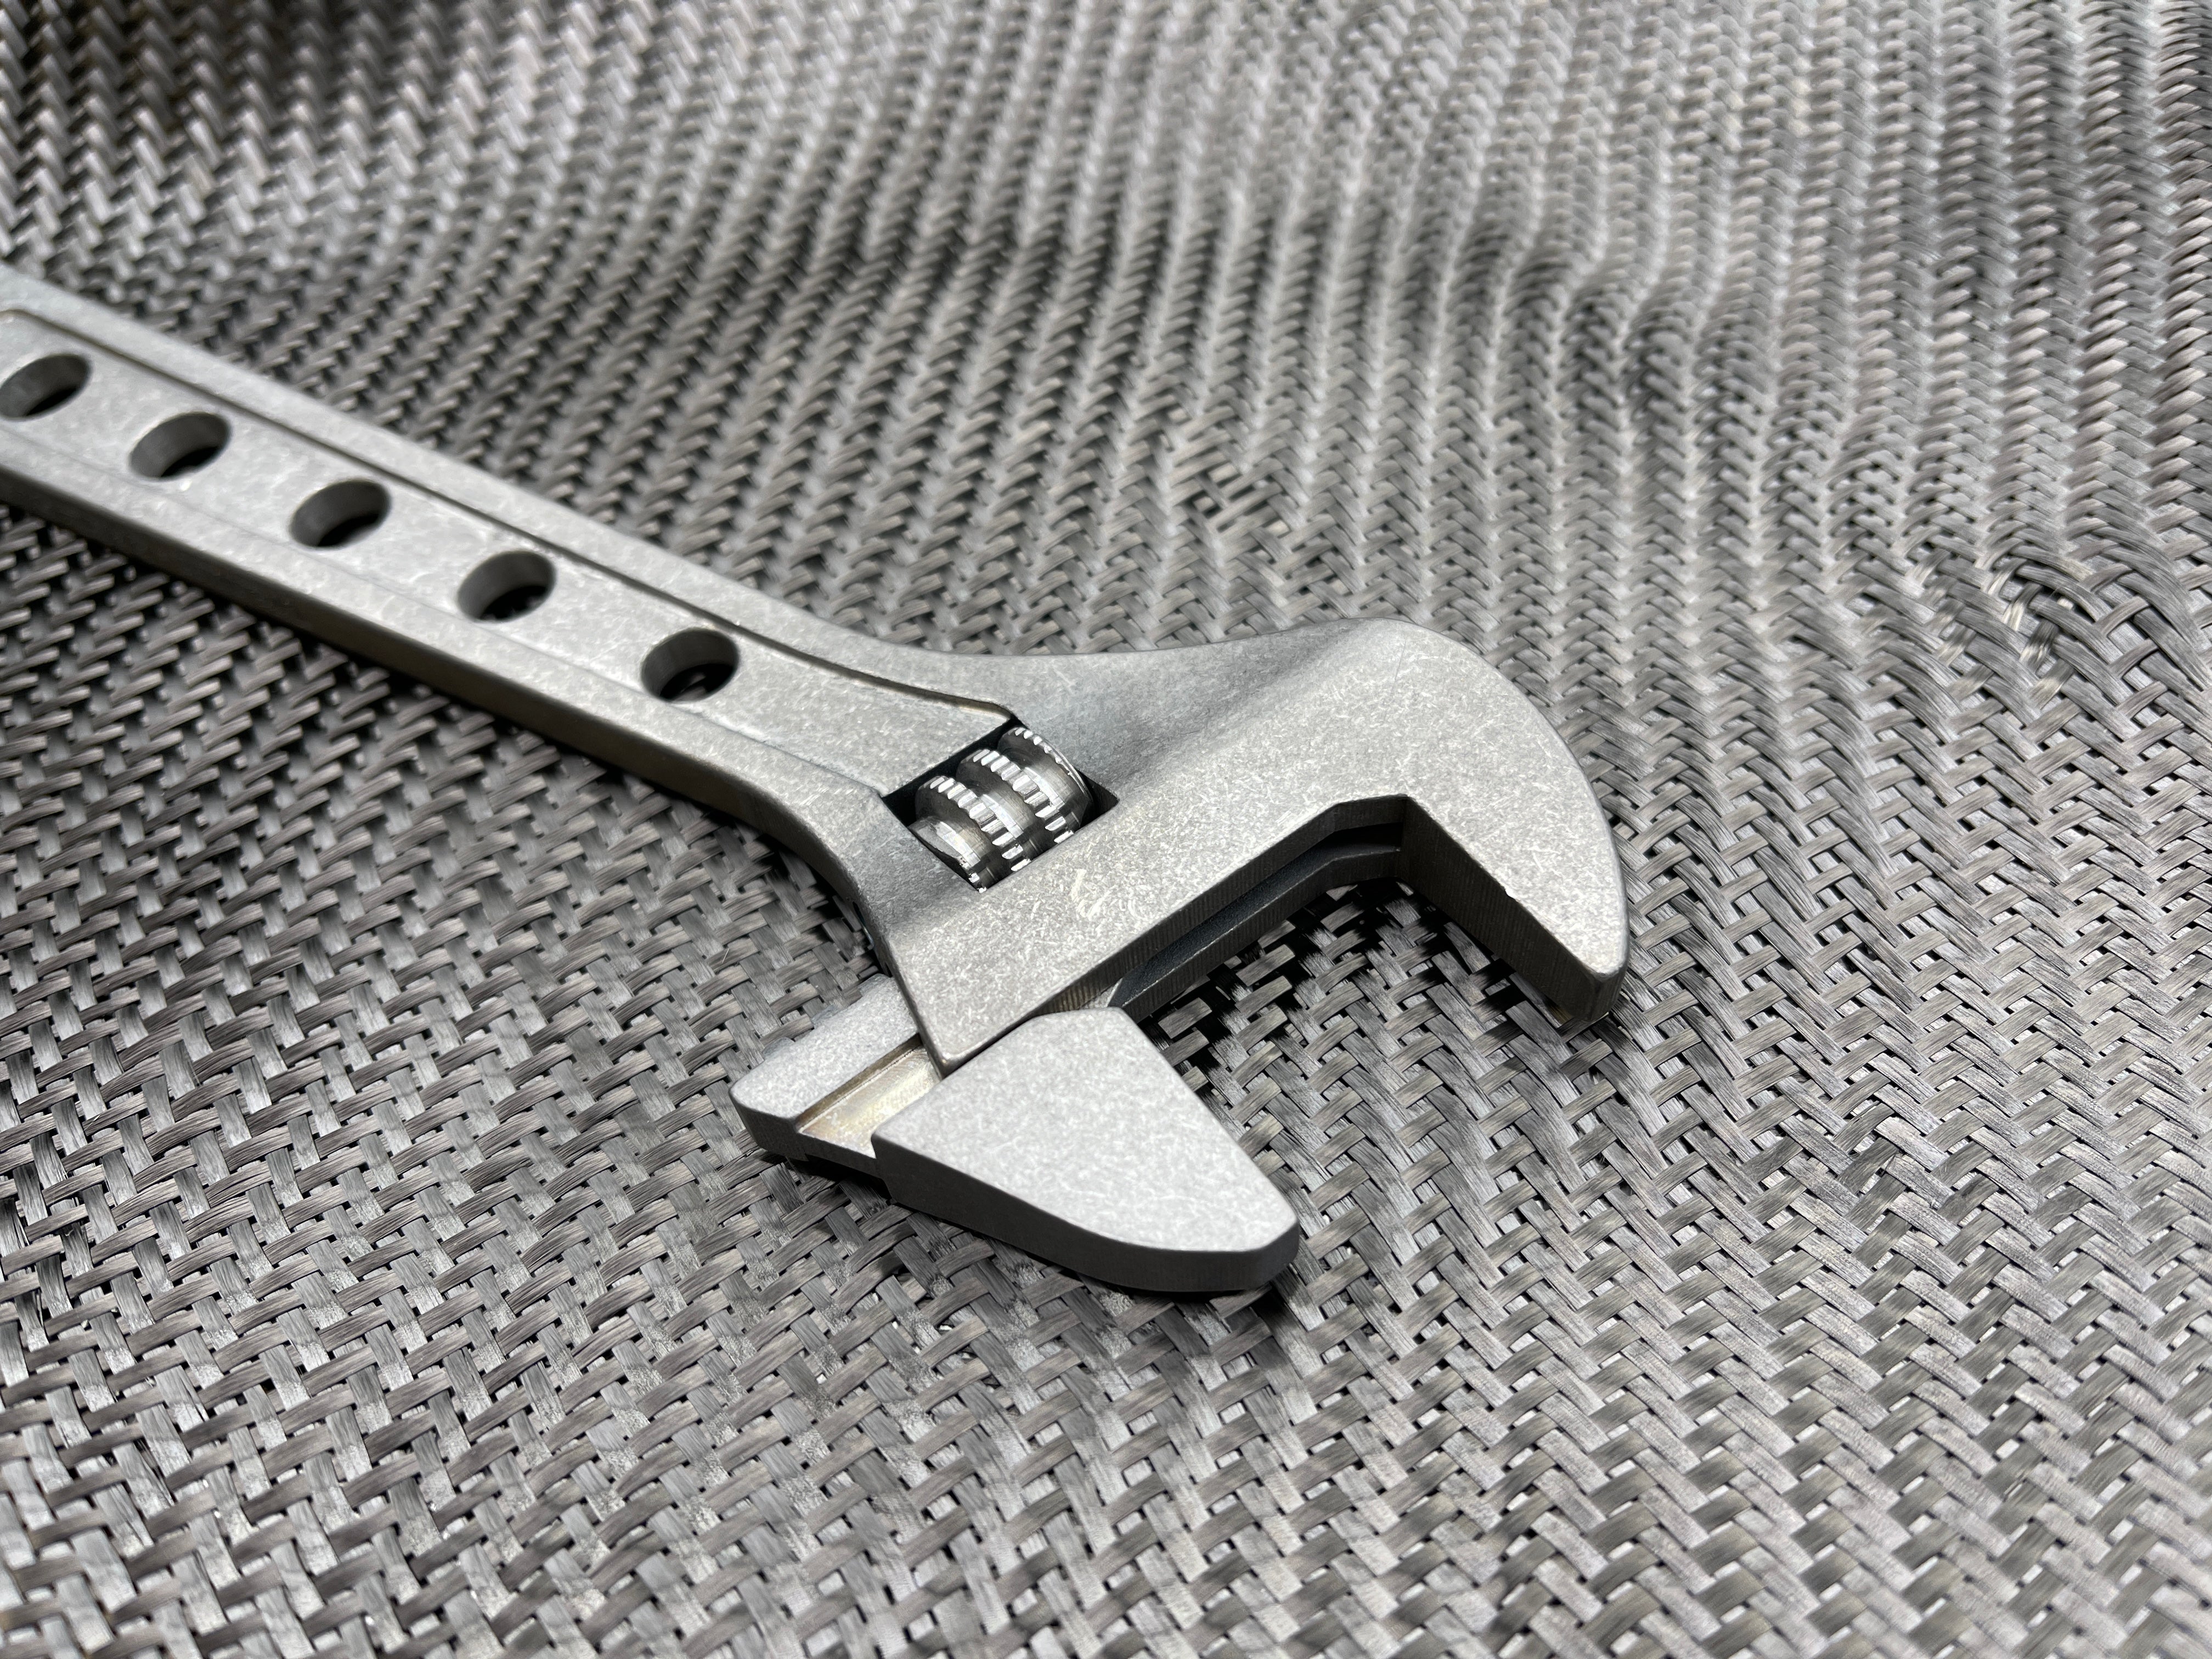 8 All Steel Adjustable Wrench